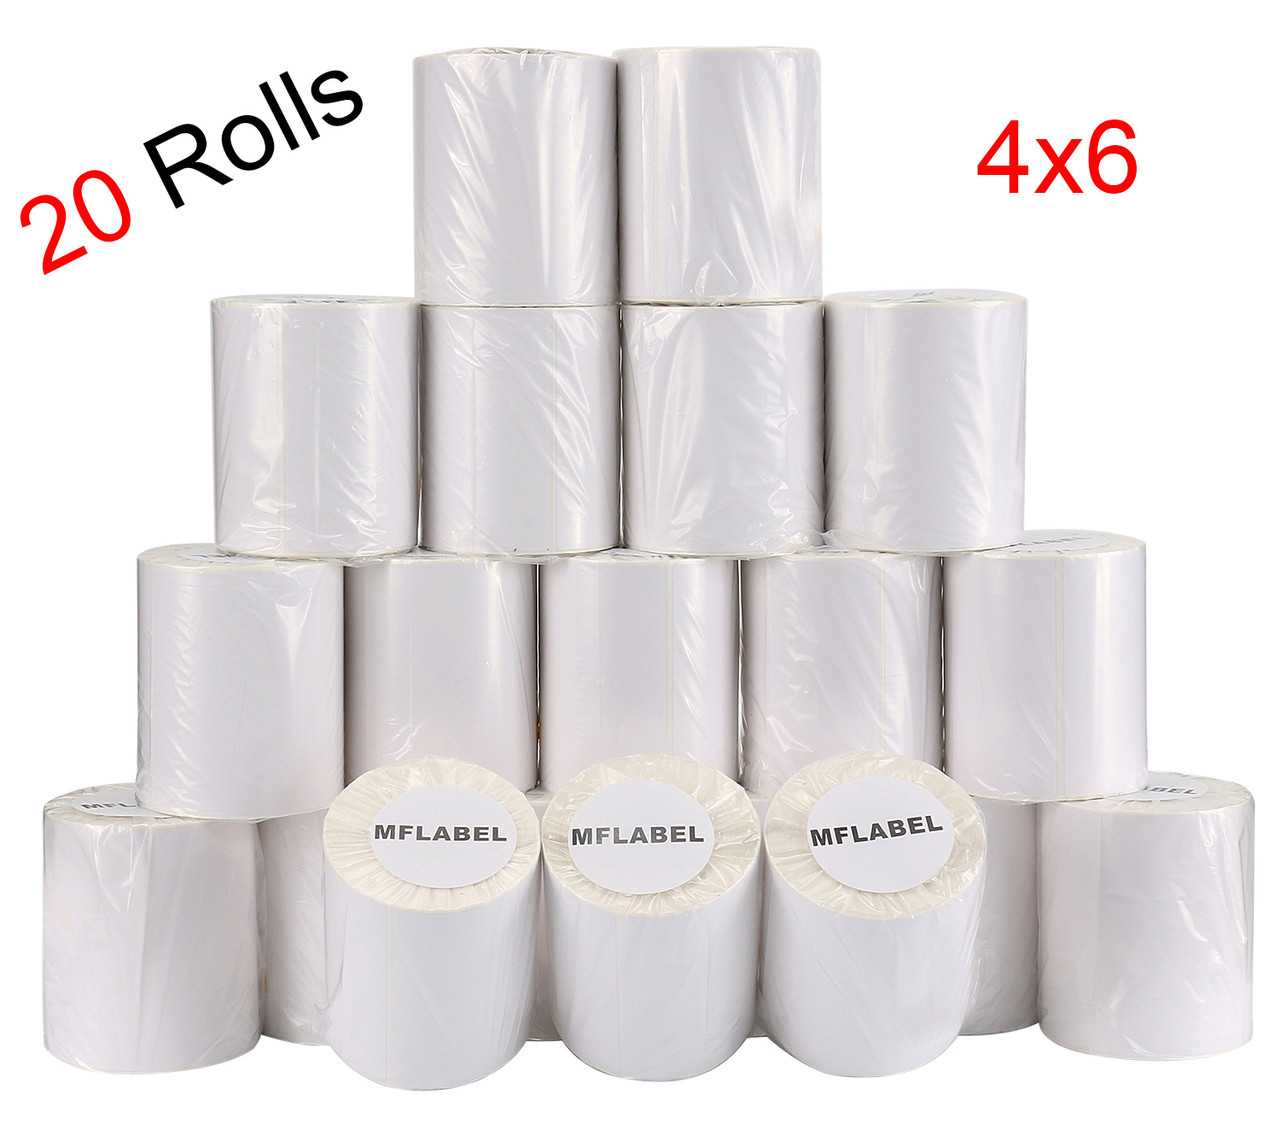 160 Labels Per Roll Perf 36 Rolls 4x4 Direct Thermal Labels For Zebra Printers